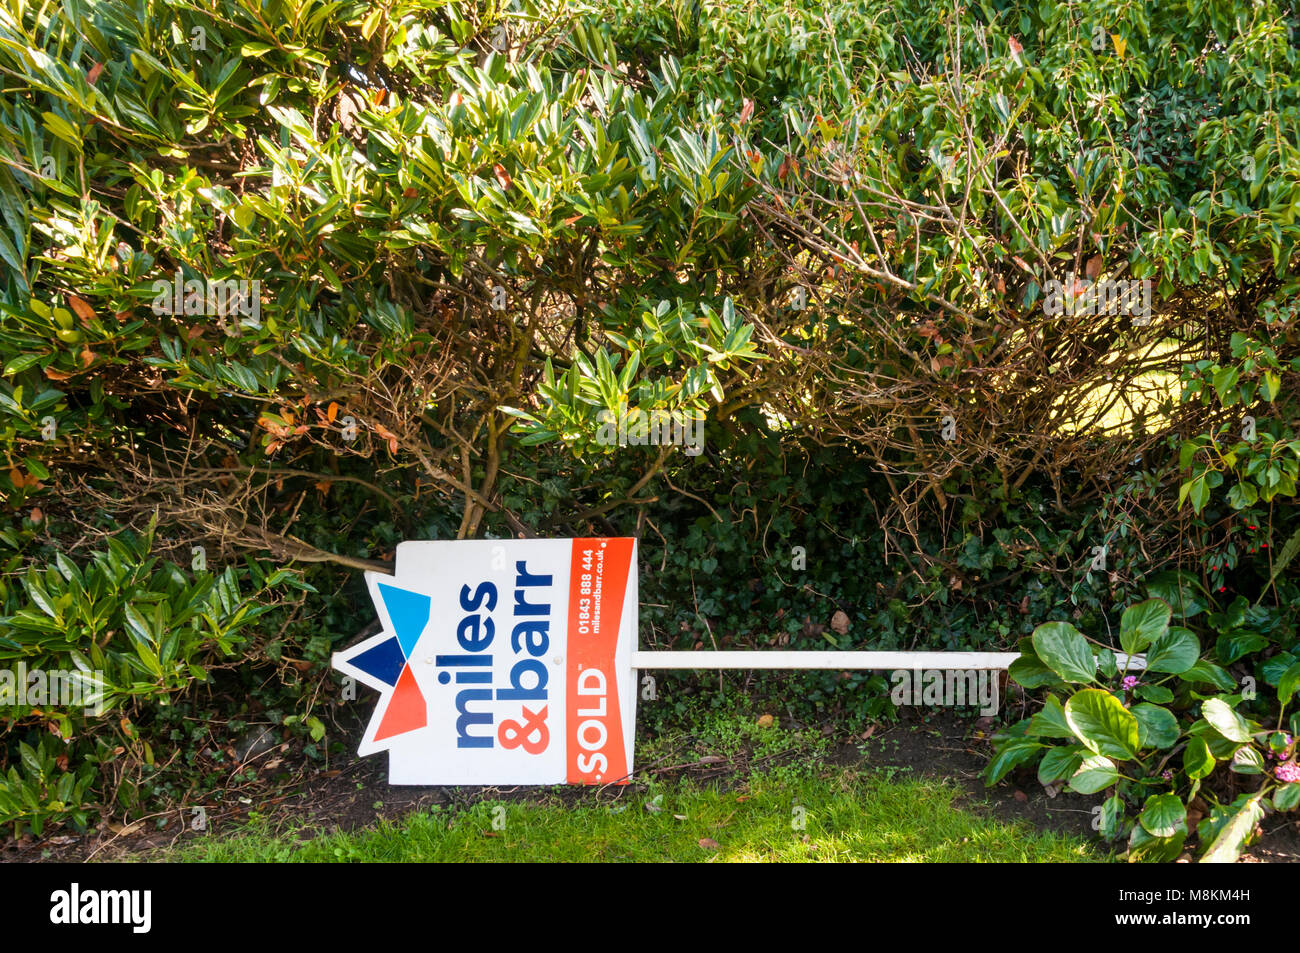 Estate Agents sold sign laying down in garden. Stock Photo